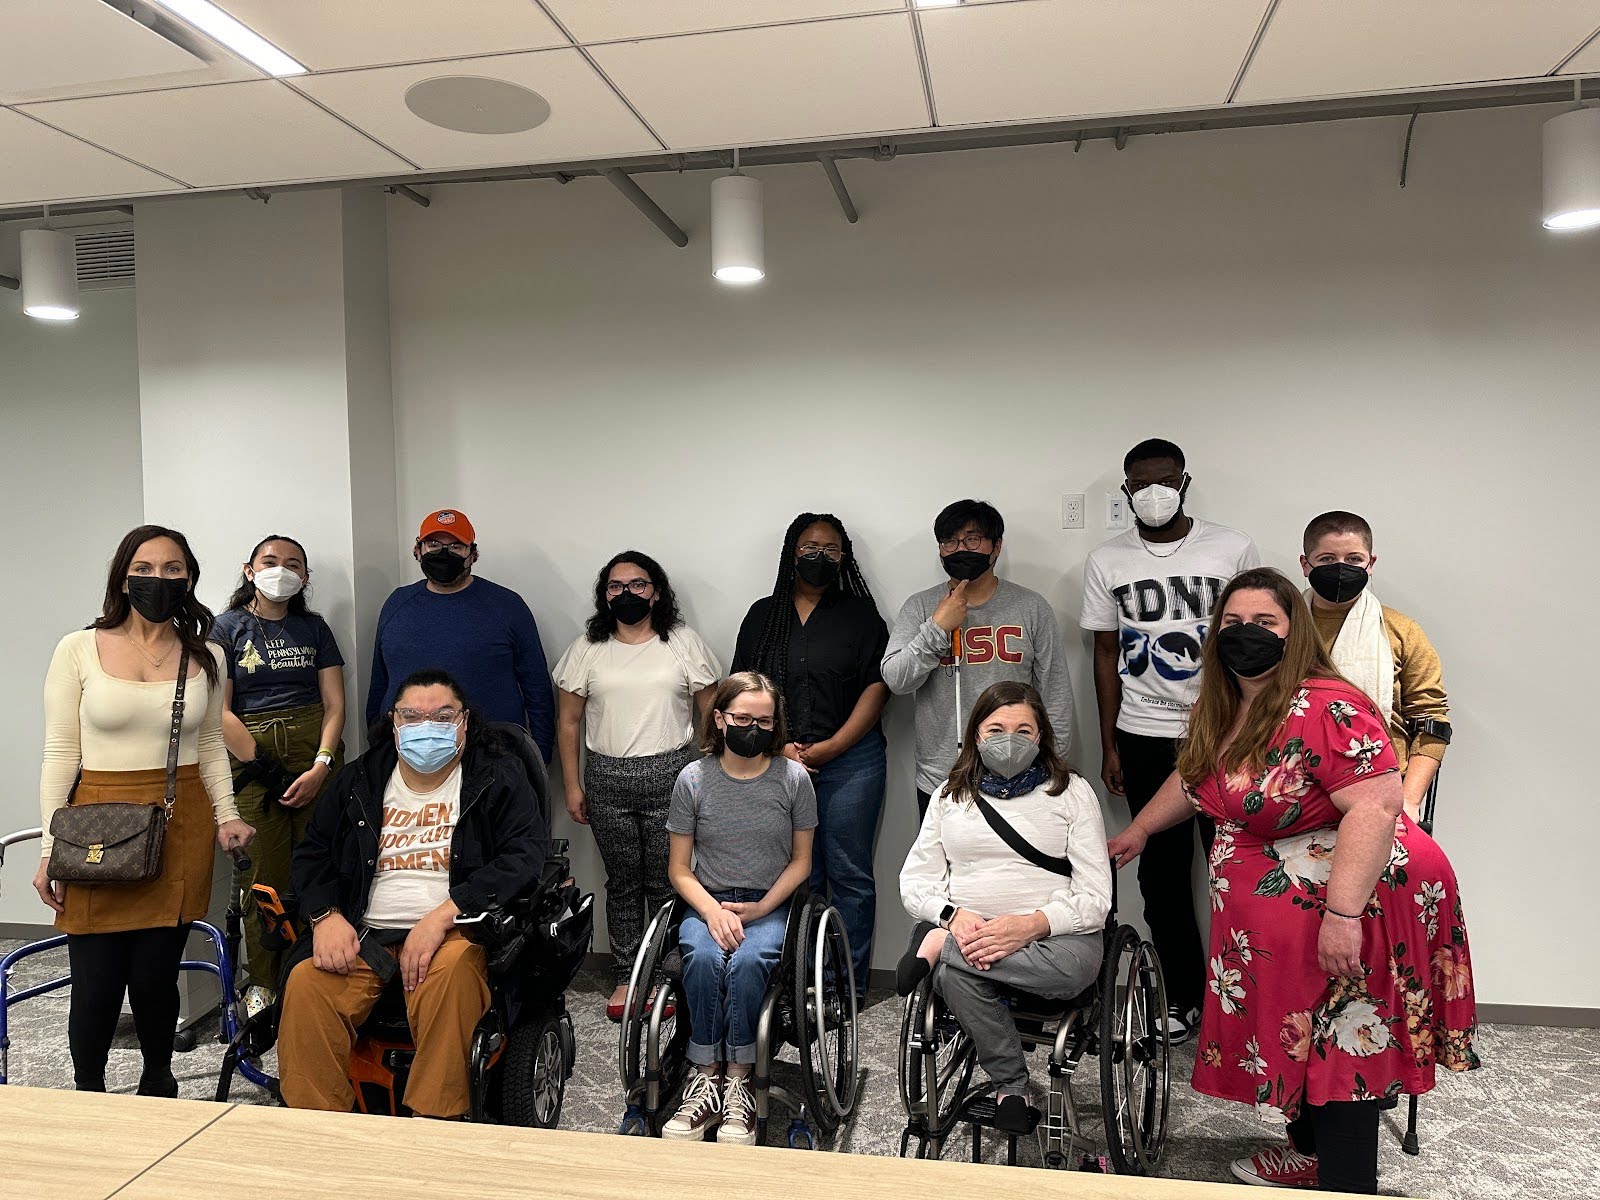 A group of twelve diverse individuals posing for a photo indoors. Several people are wearing face masks, and three individuals are seated in wheelchairs.